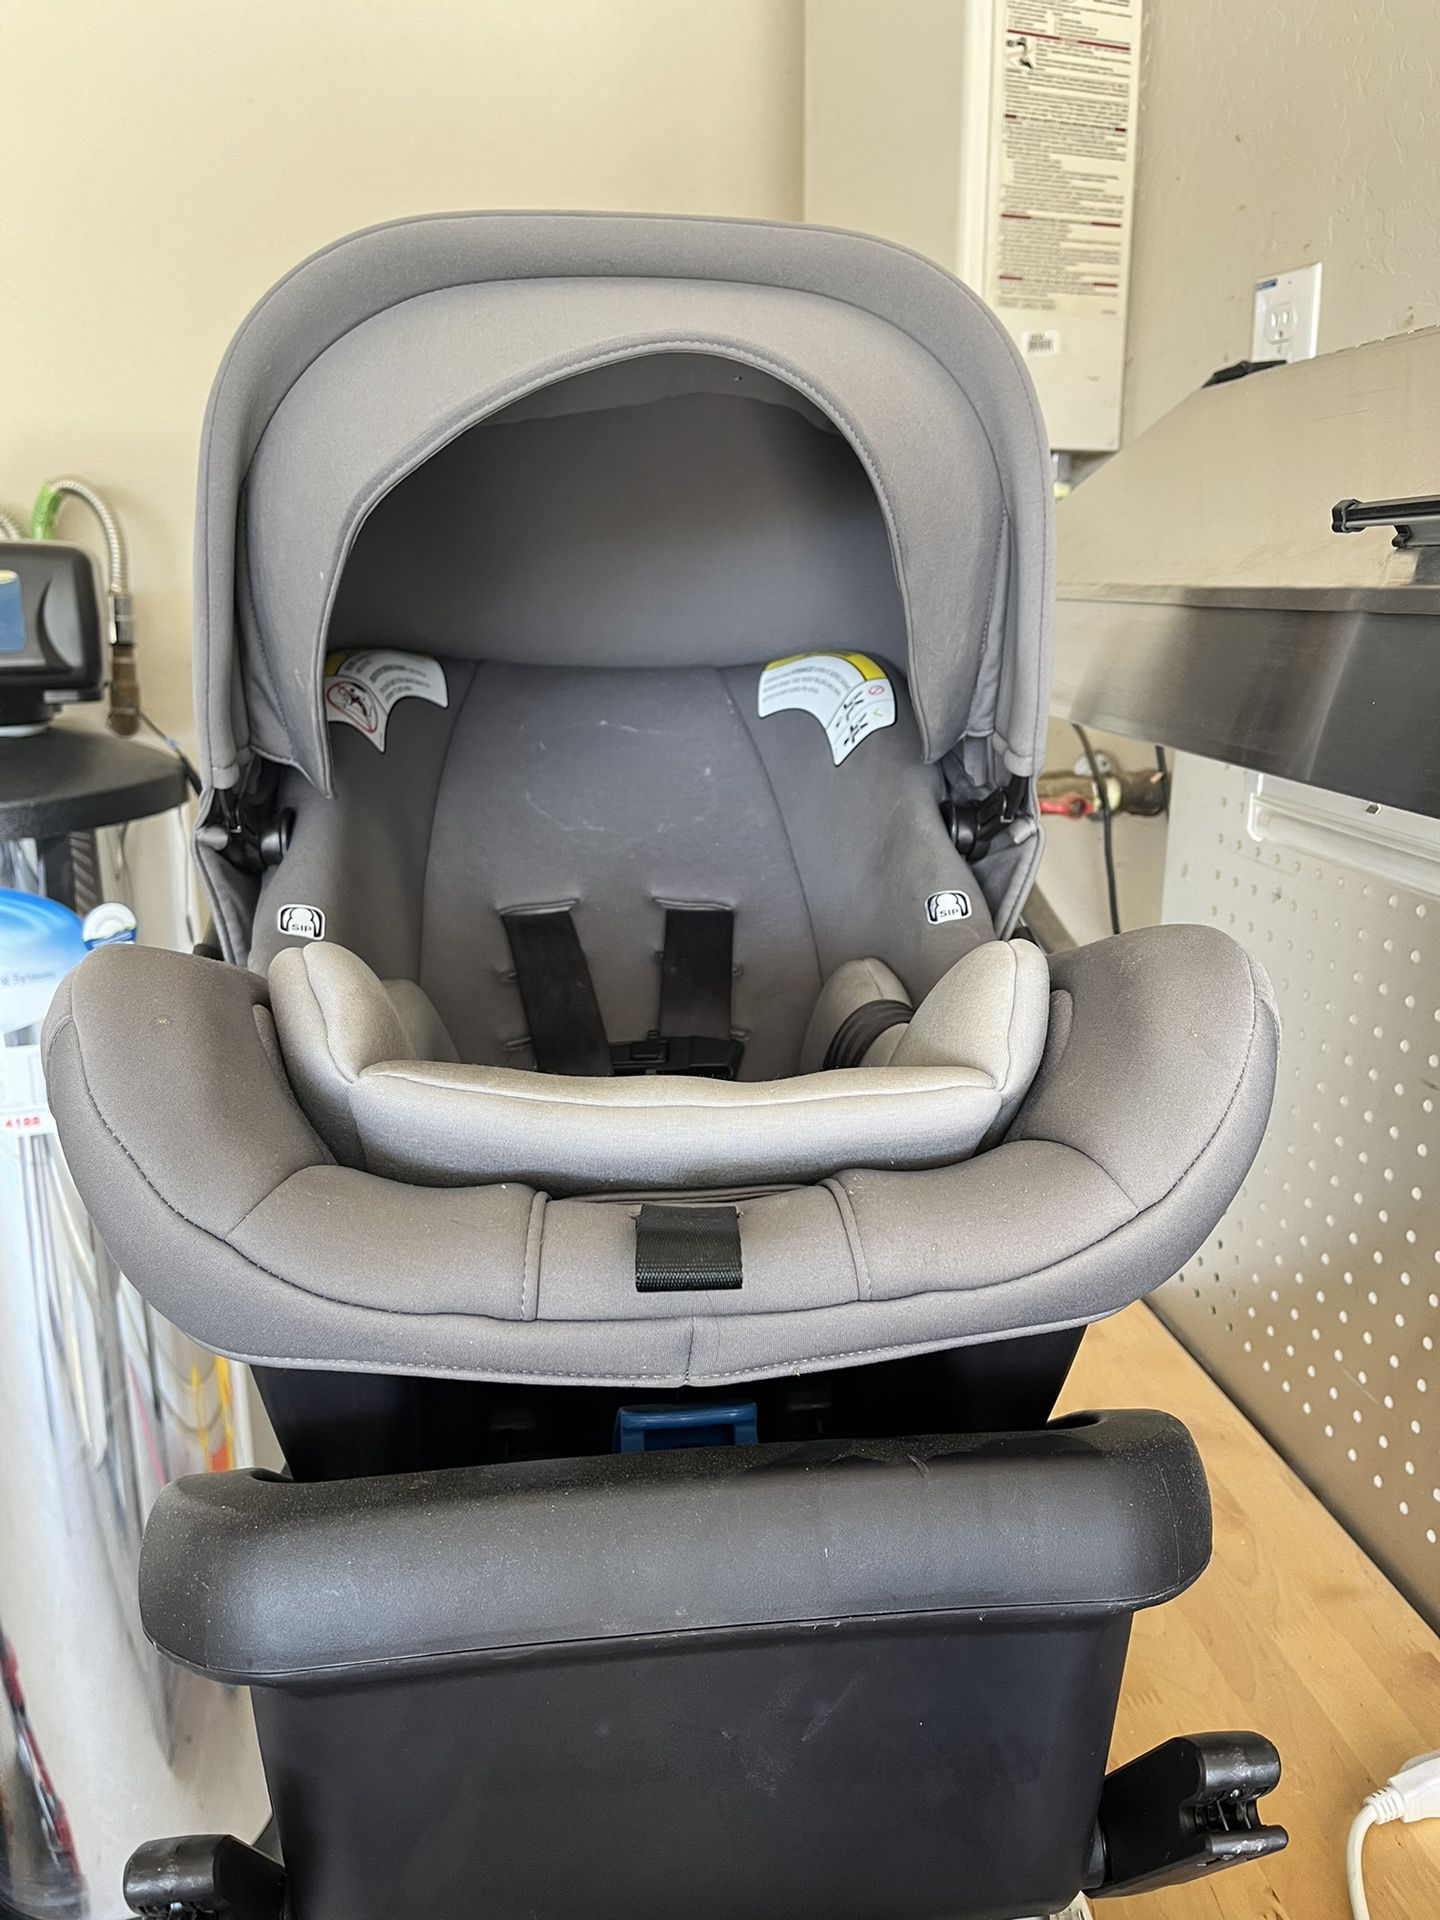 Infant Carseat and Base 